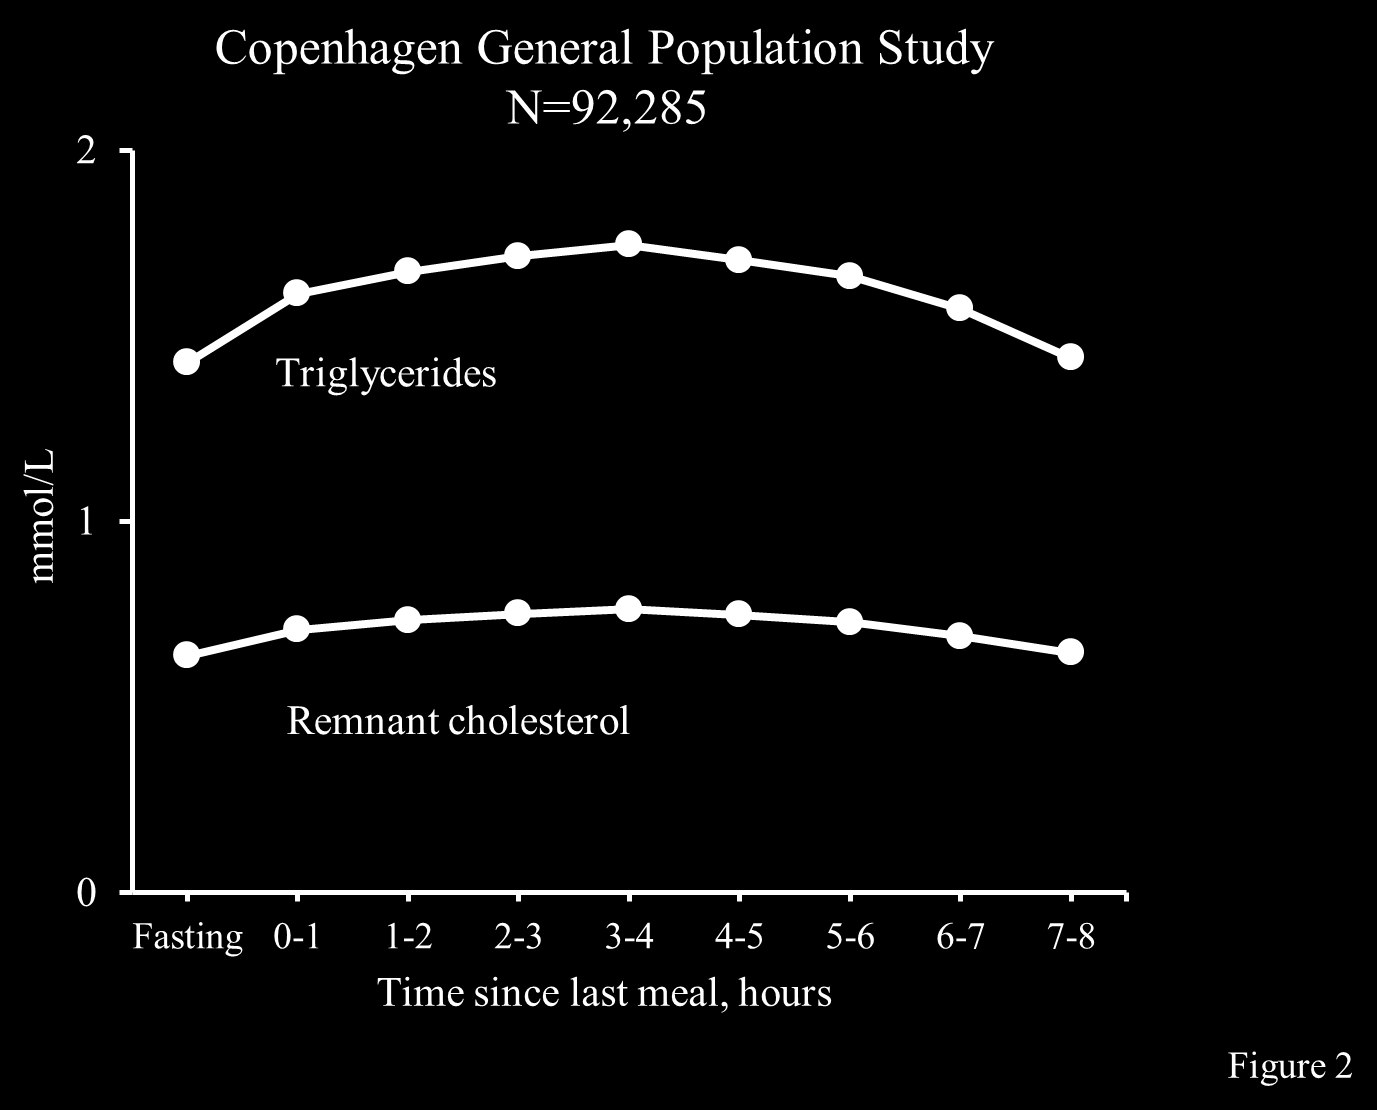 Figure 2. Mean concentrations of plasma triglycerides and remnant cholesterol as a function of time since the last meal in individuals in the general population.